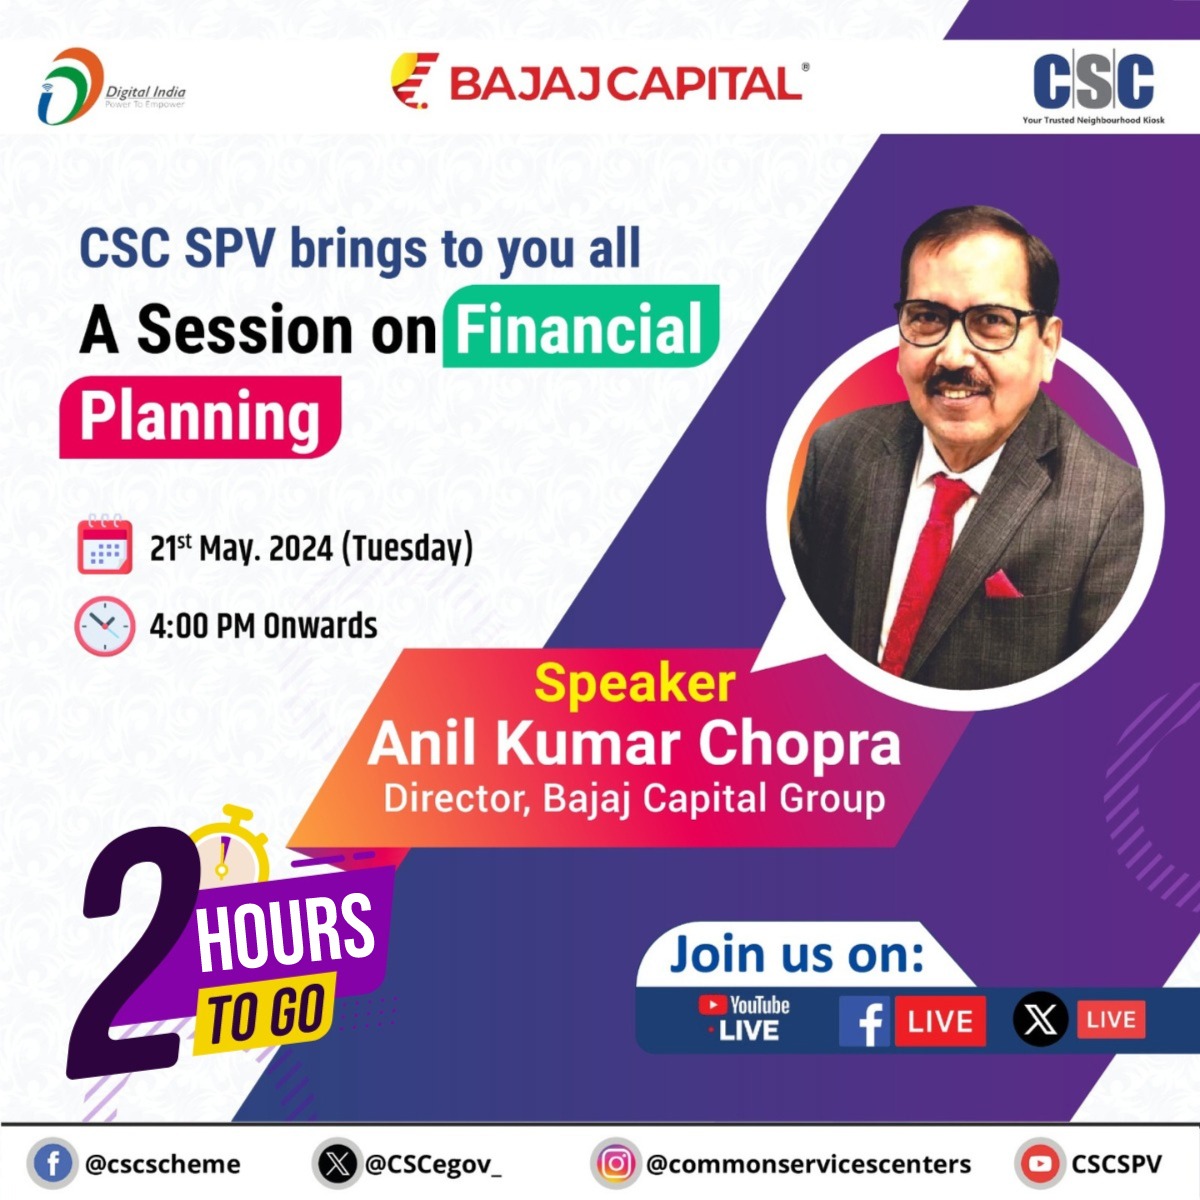 CSC SPV brings to you all 'A Session on Financial Planning'... In this discussion, Anil Kumar Chopra, Director, #BajajCapital Group will be joining us LIVE on the #CSC X Page, on 21st May, 2024 (Today) from 4 PM onwards. #DigitalIndia #FinancialPlanning #CSCFinanceService